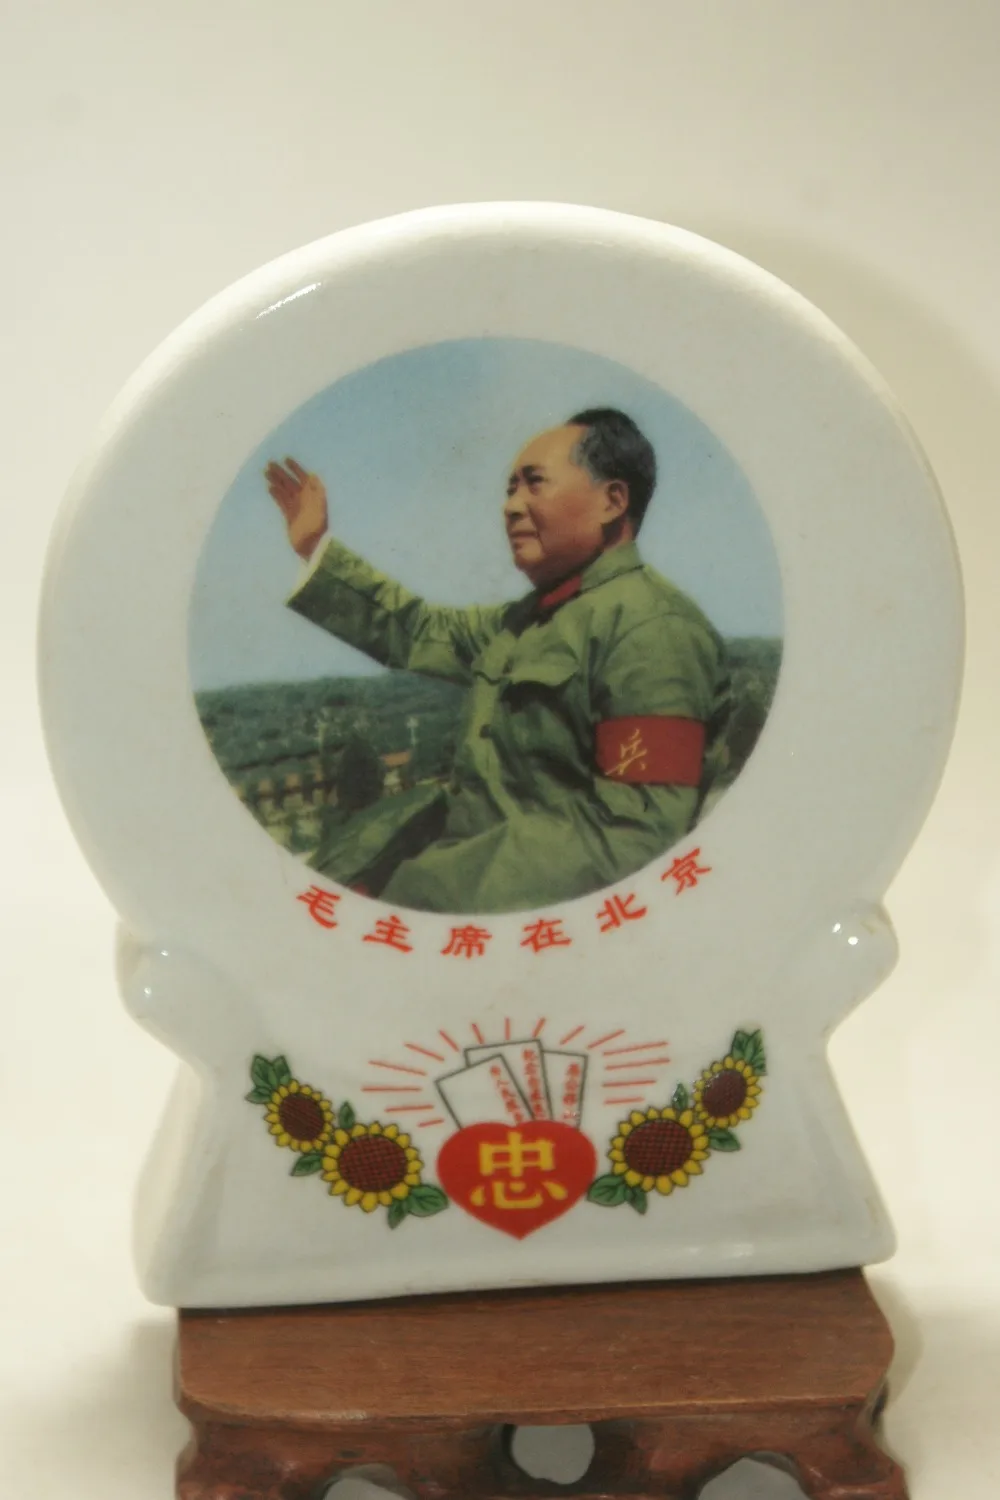 

China cultural revolution Porcelain Station Plates mao zedong Portrait classic art collection and home decorations